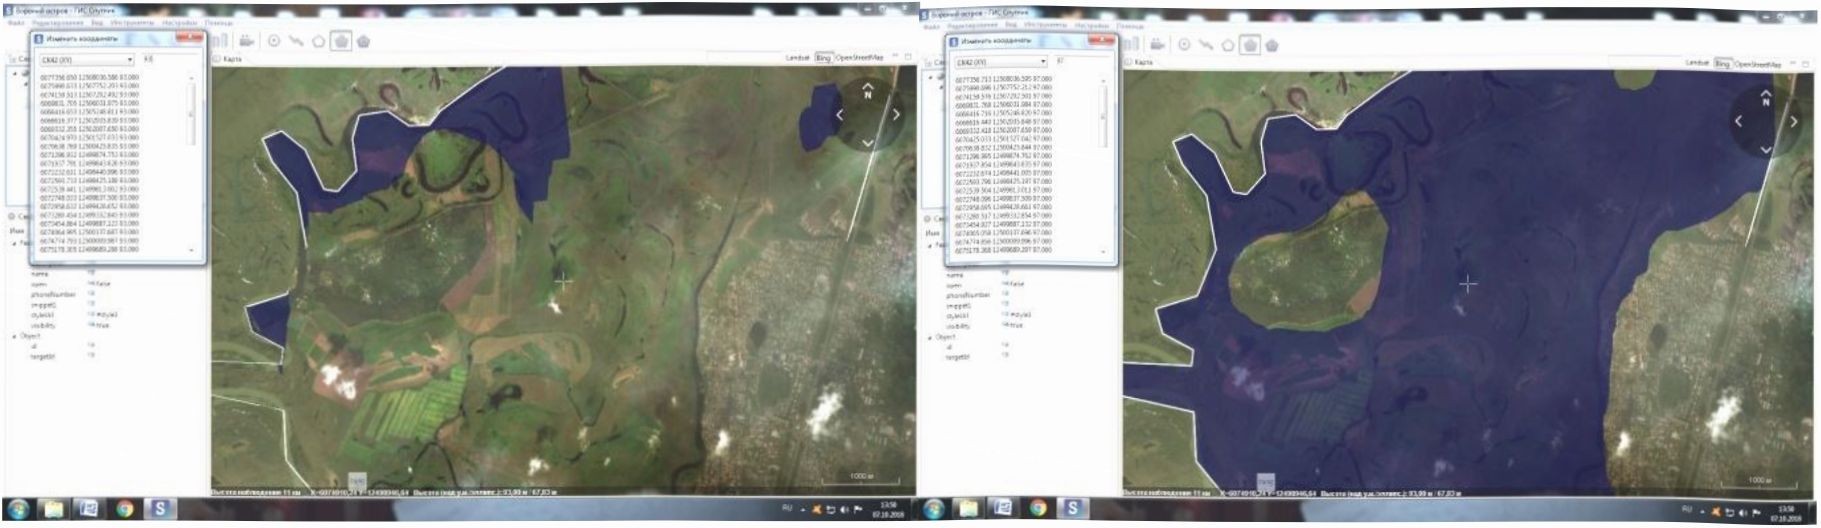 The use of gis technology in predicting flood areas